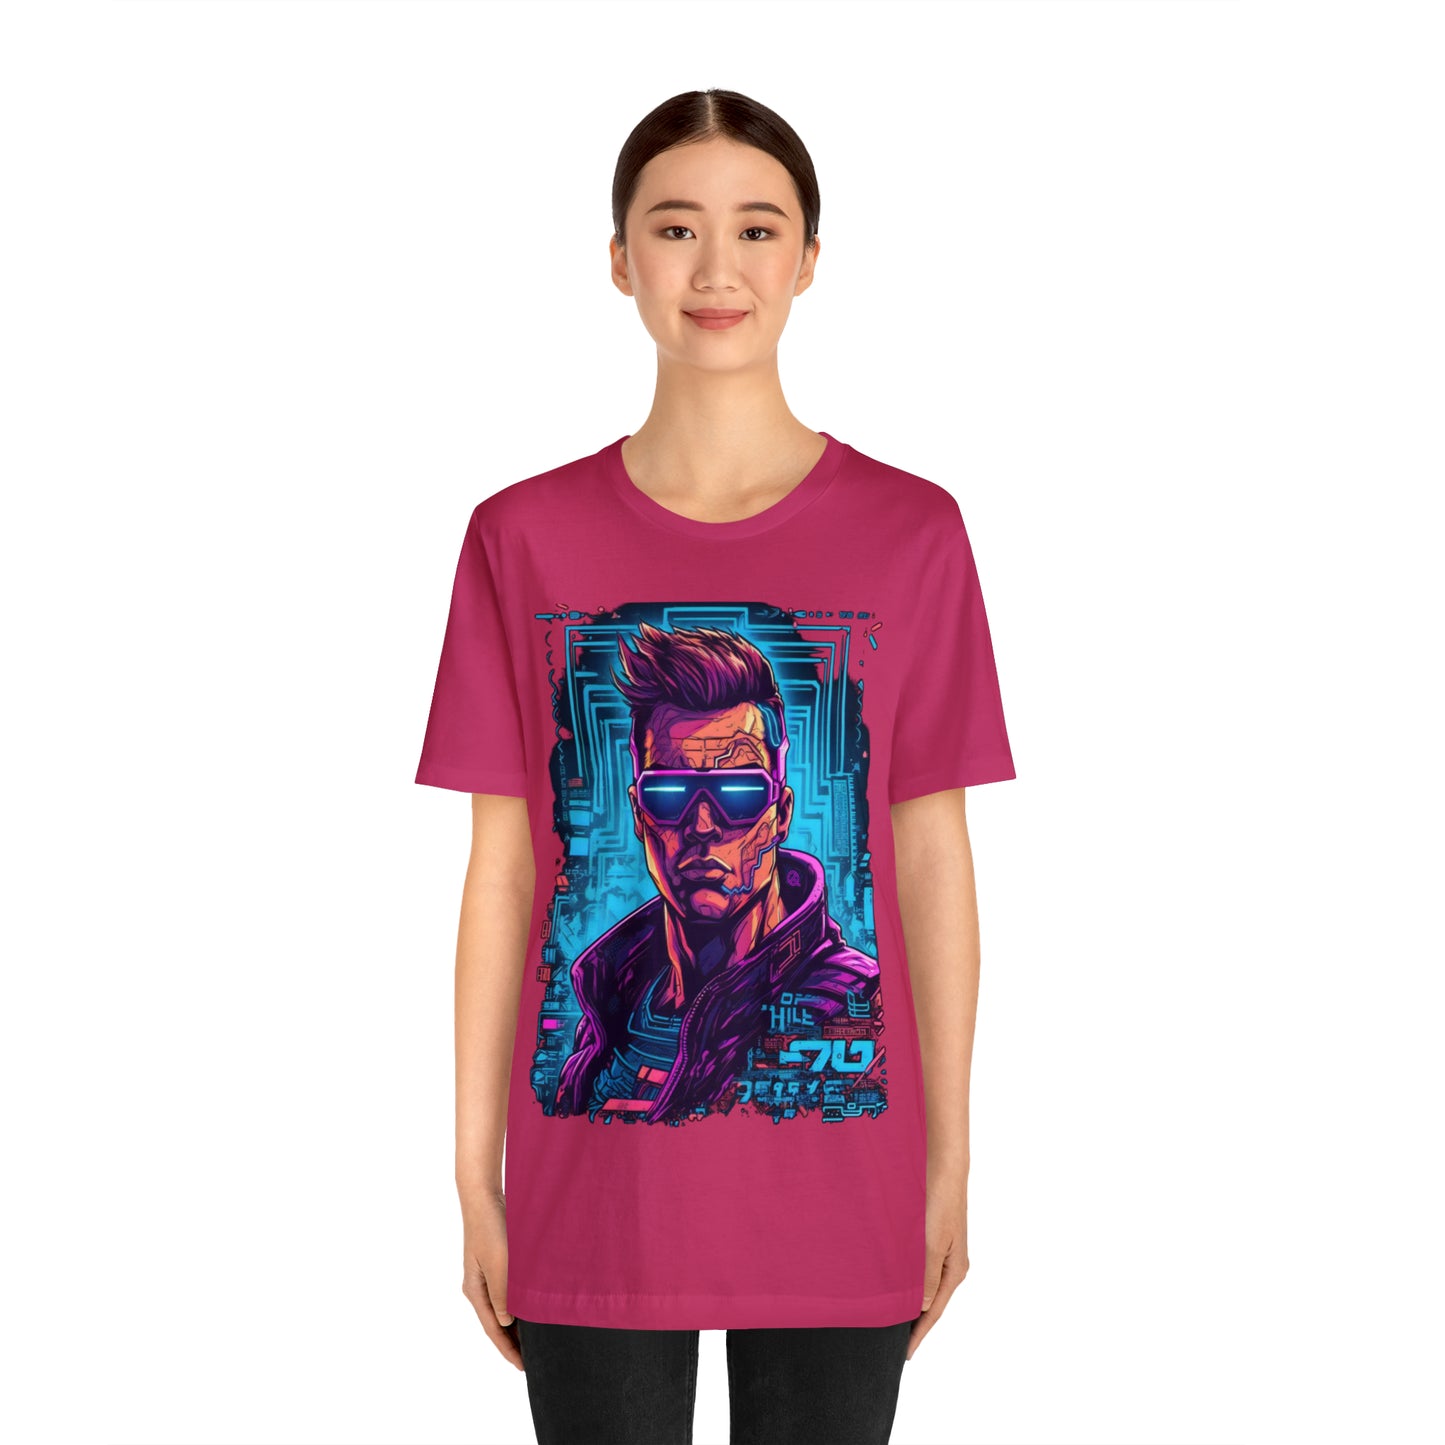 berry-quest-thread-tee-shirt-with-large-neon-cyber-punk-on-center